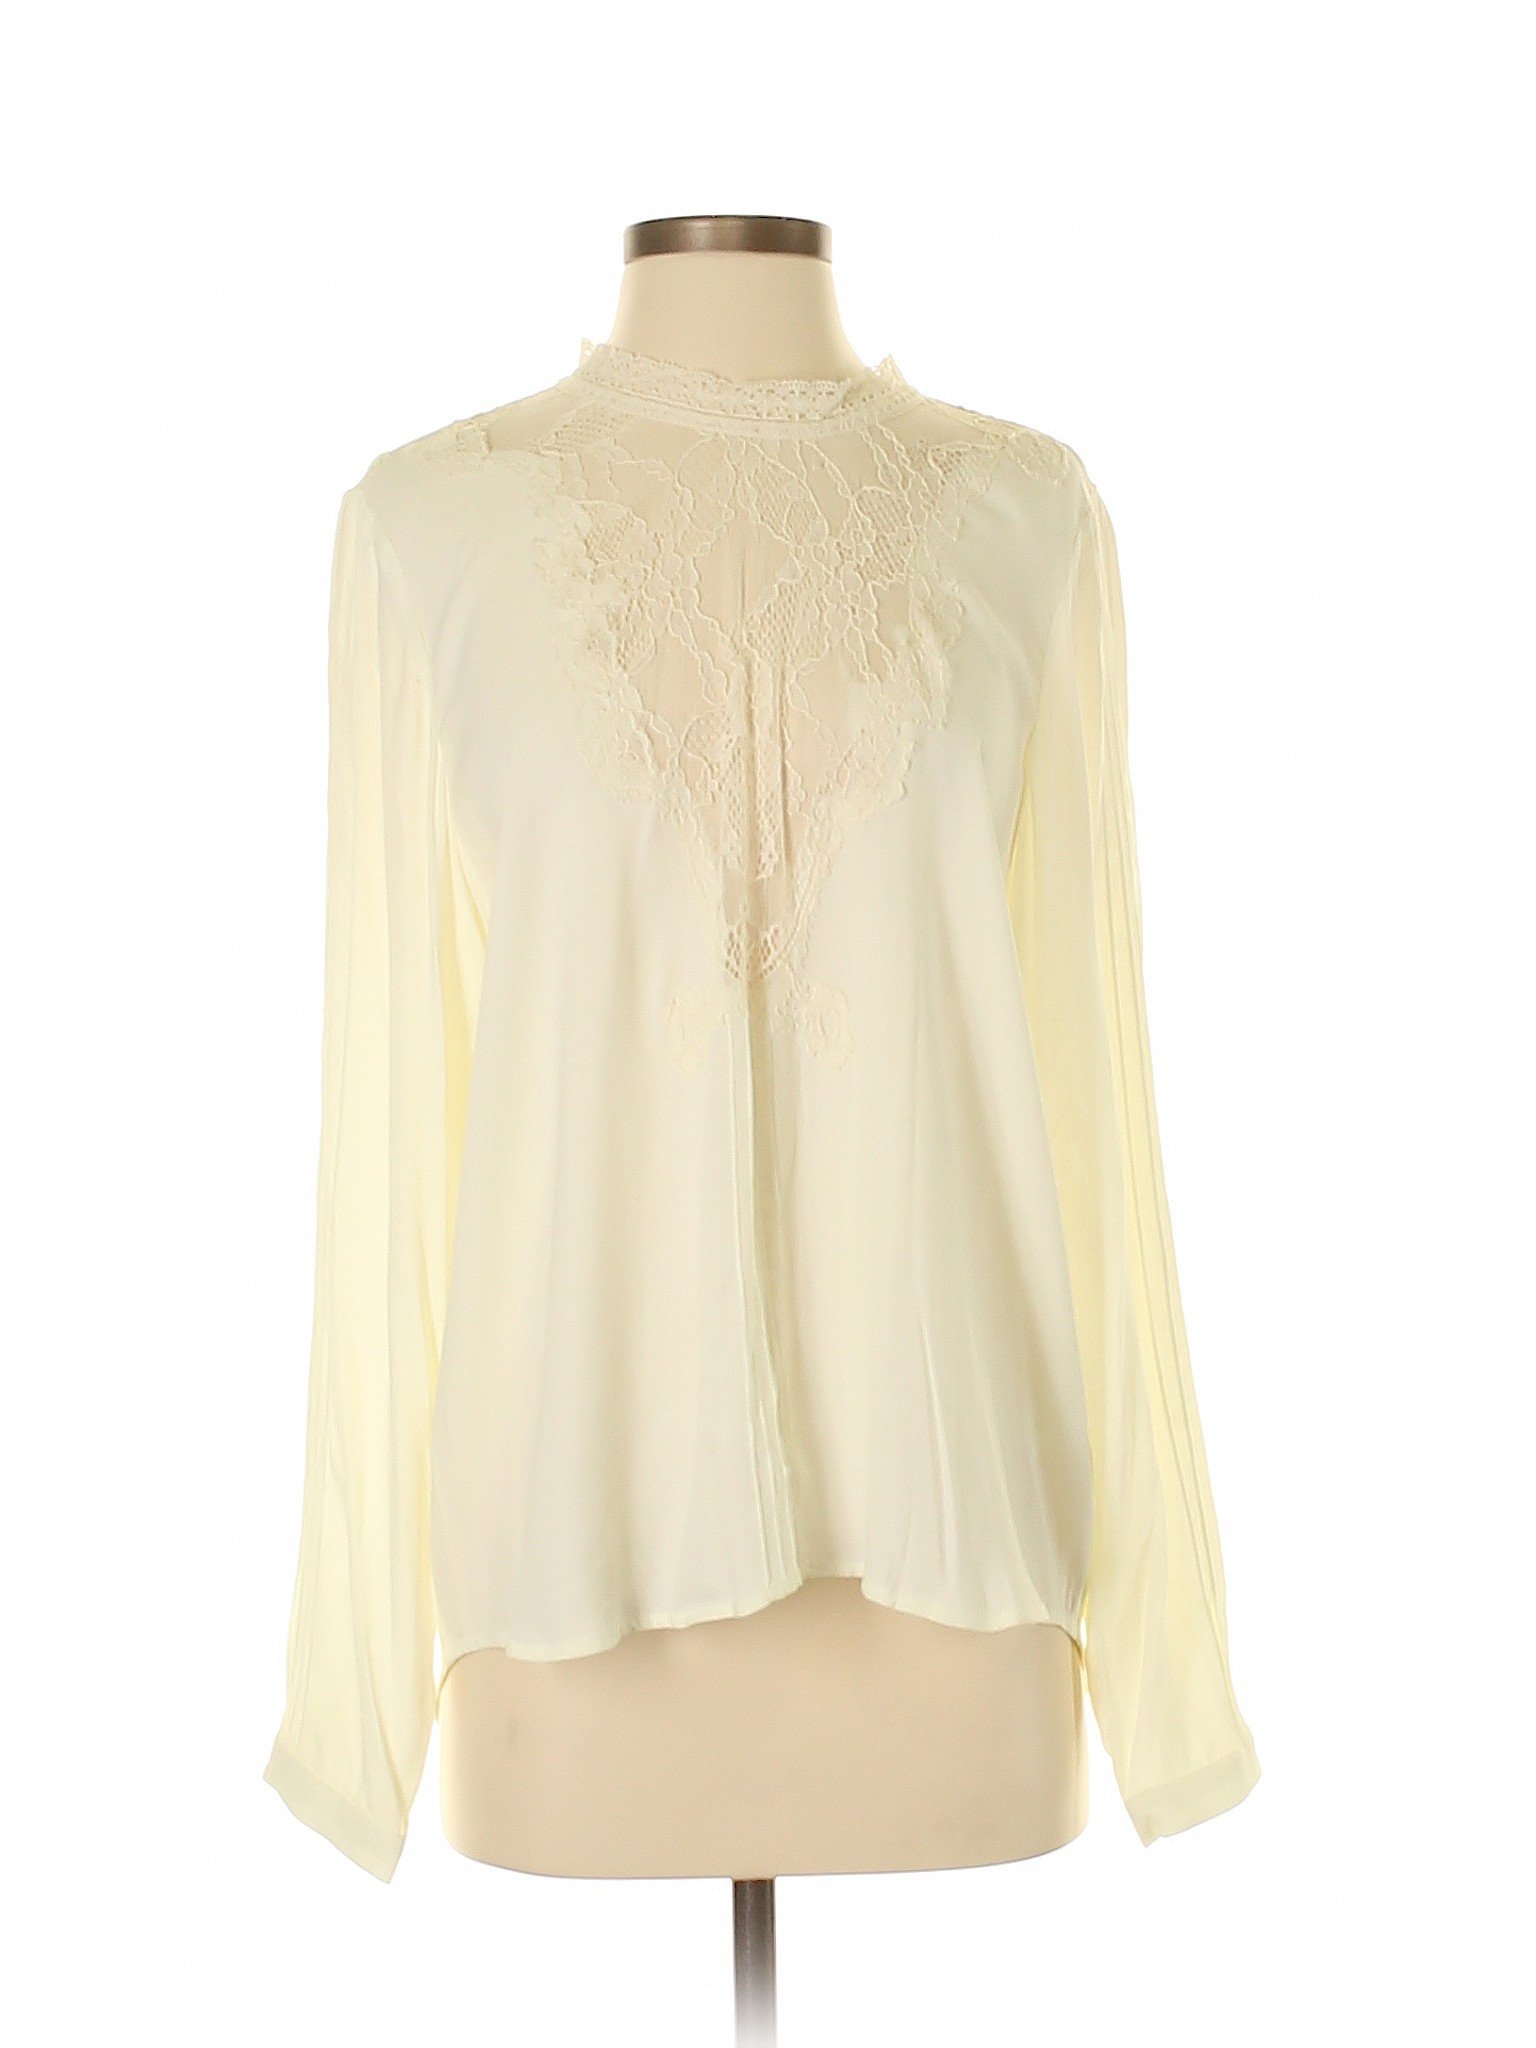 Sea New York 100% Polyester Lace Ivory Long Sleeve Blouse Size 8 - 76% ...